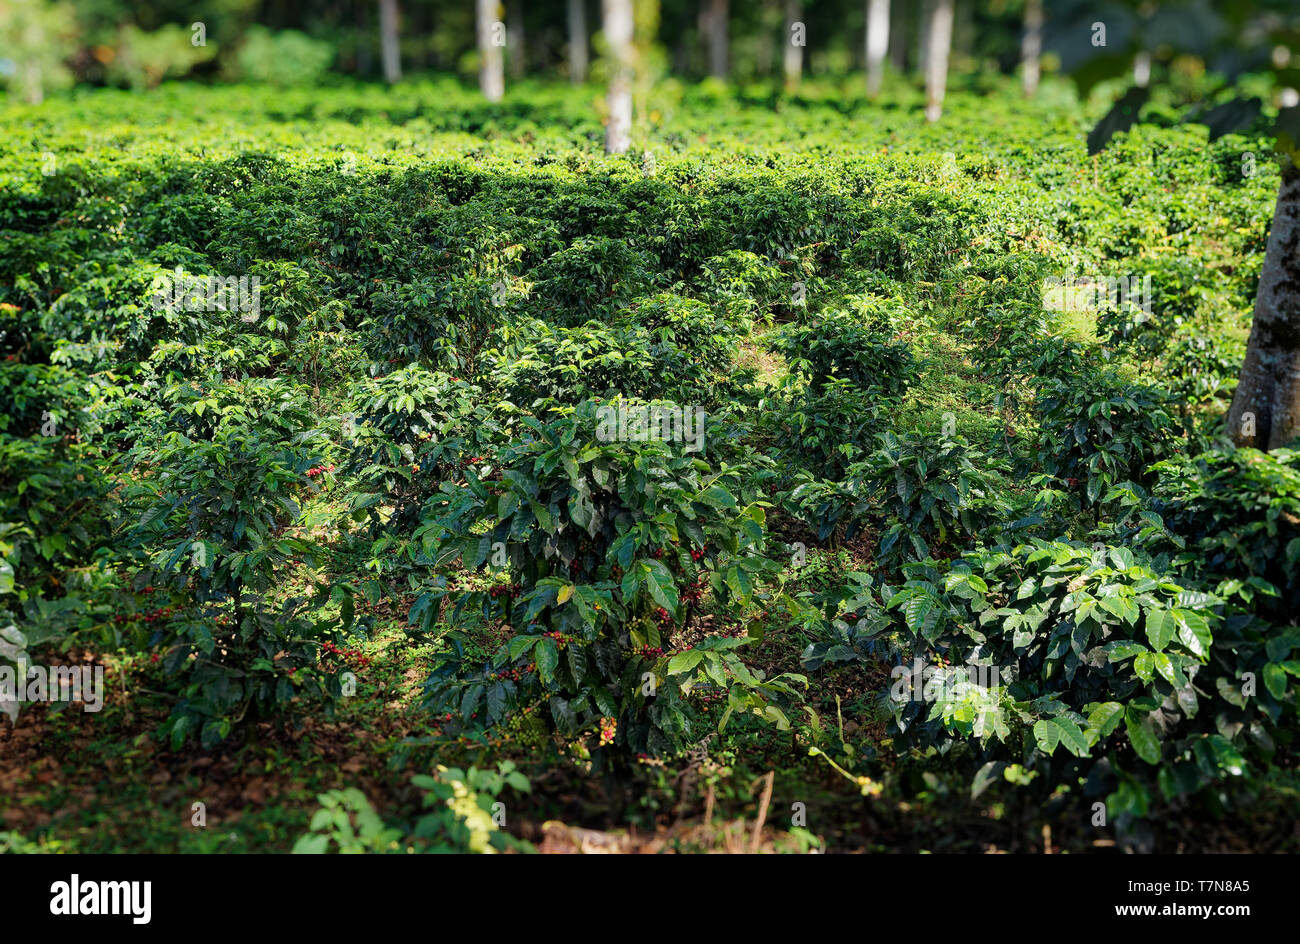 Costa Rica Coffea plantations. Coffea is a genus of flowering plants in the family Rubiaceae. Coffea species are shrubs or small trees native to tropi Stock Photo